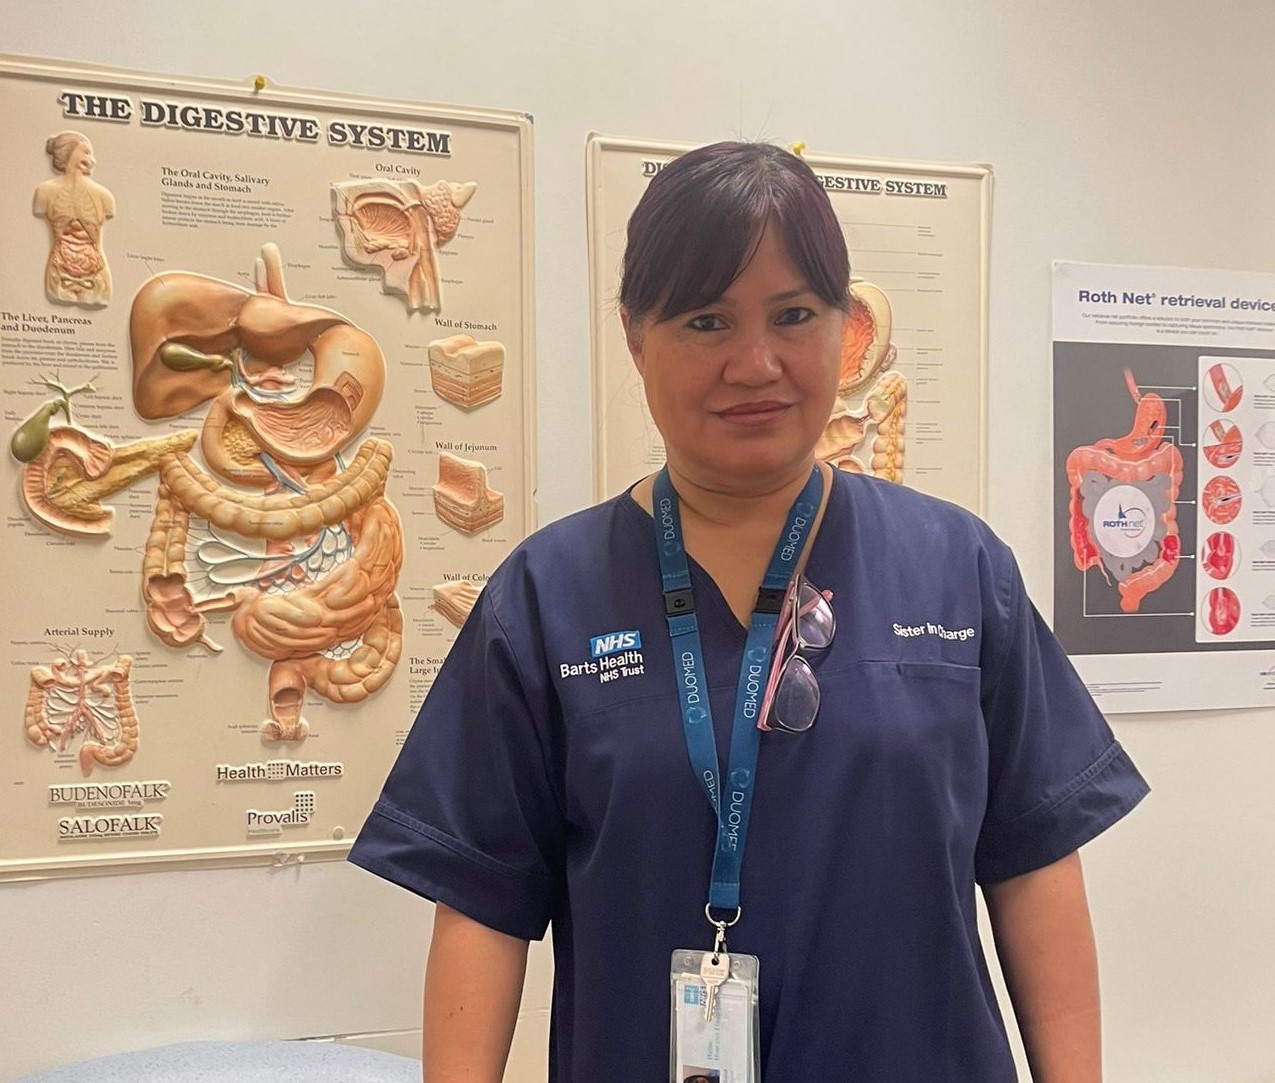 Greta Adique, Sister and Endoscopy nurse at DMC Healthcare, tells us more about her work and explains the excellent teamwork and reporting systems.